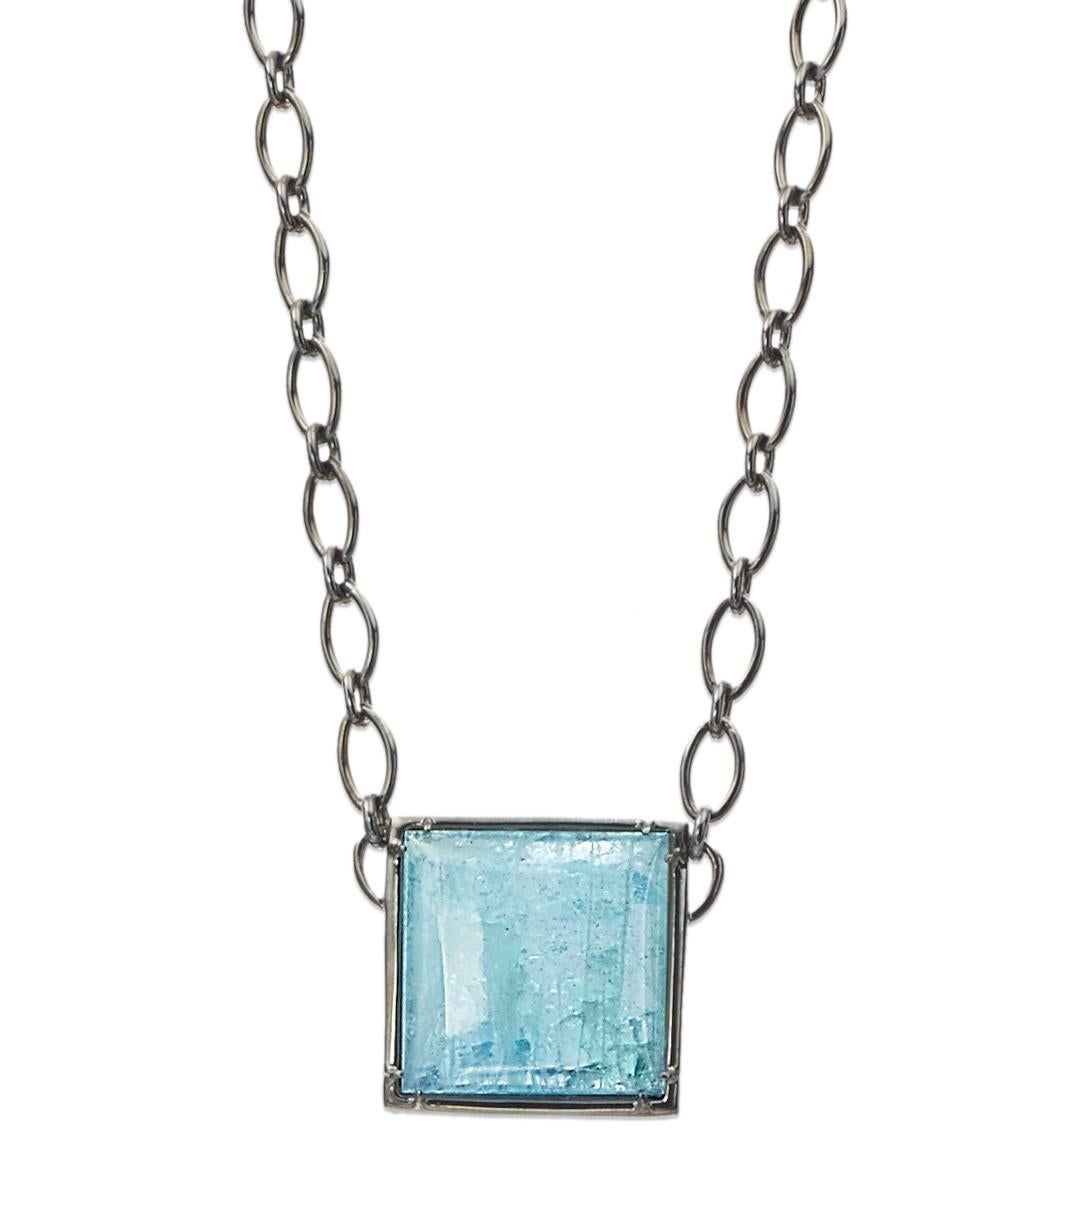 Women's Sterling Silver Pendant Necklace with Square Aquamarine Cabochon For Sale